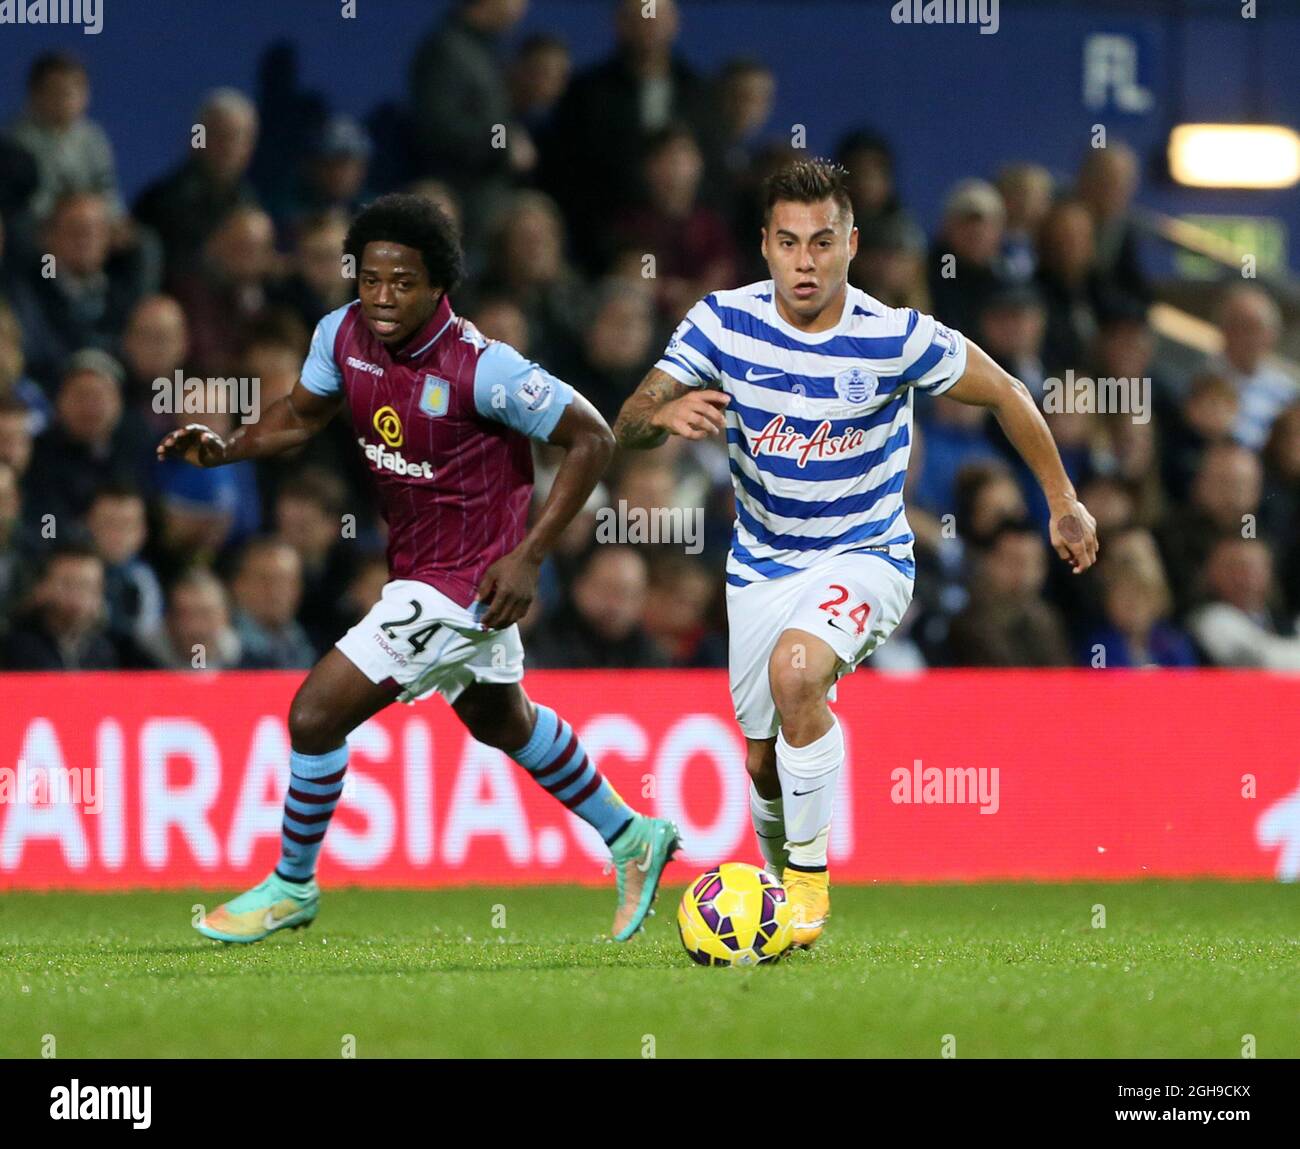 QPR's Eduardo Vargas tussles with Aston Villa's Carlos Sanchez during the Barclays Premier League match between Queens Park Rangers and Aston Villa at the Loftus Road in England on October 27, 2014. Stock Photo